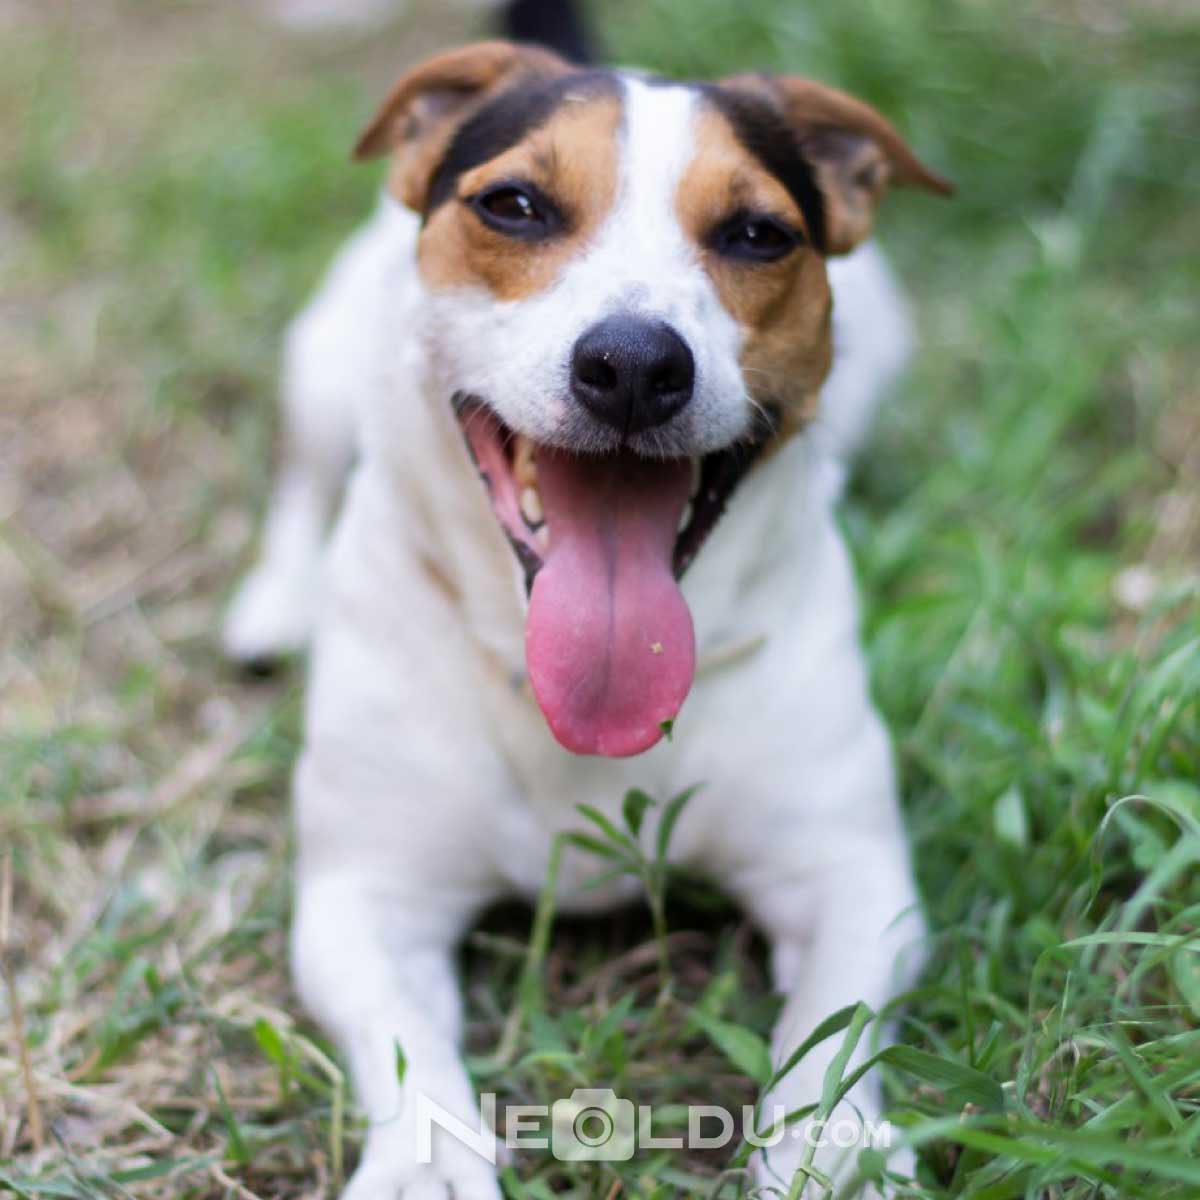 Information about the Jack Russell dog